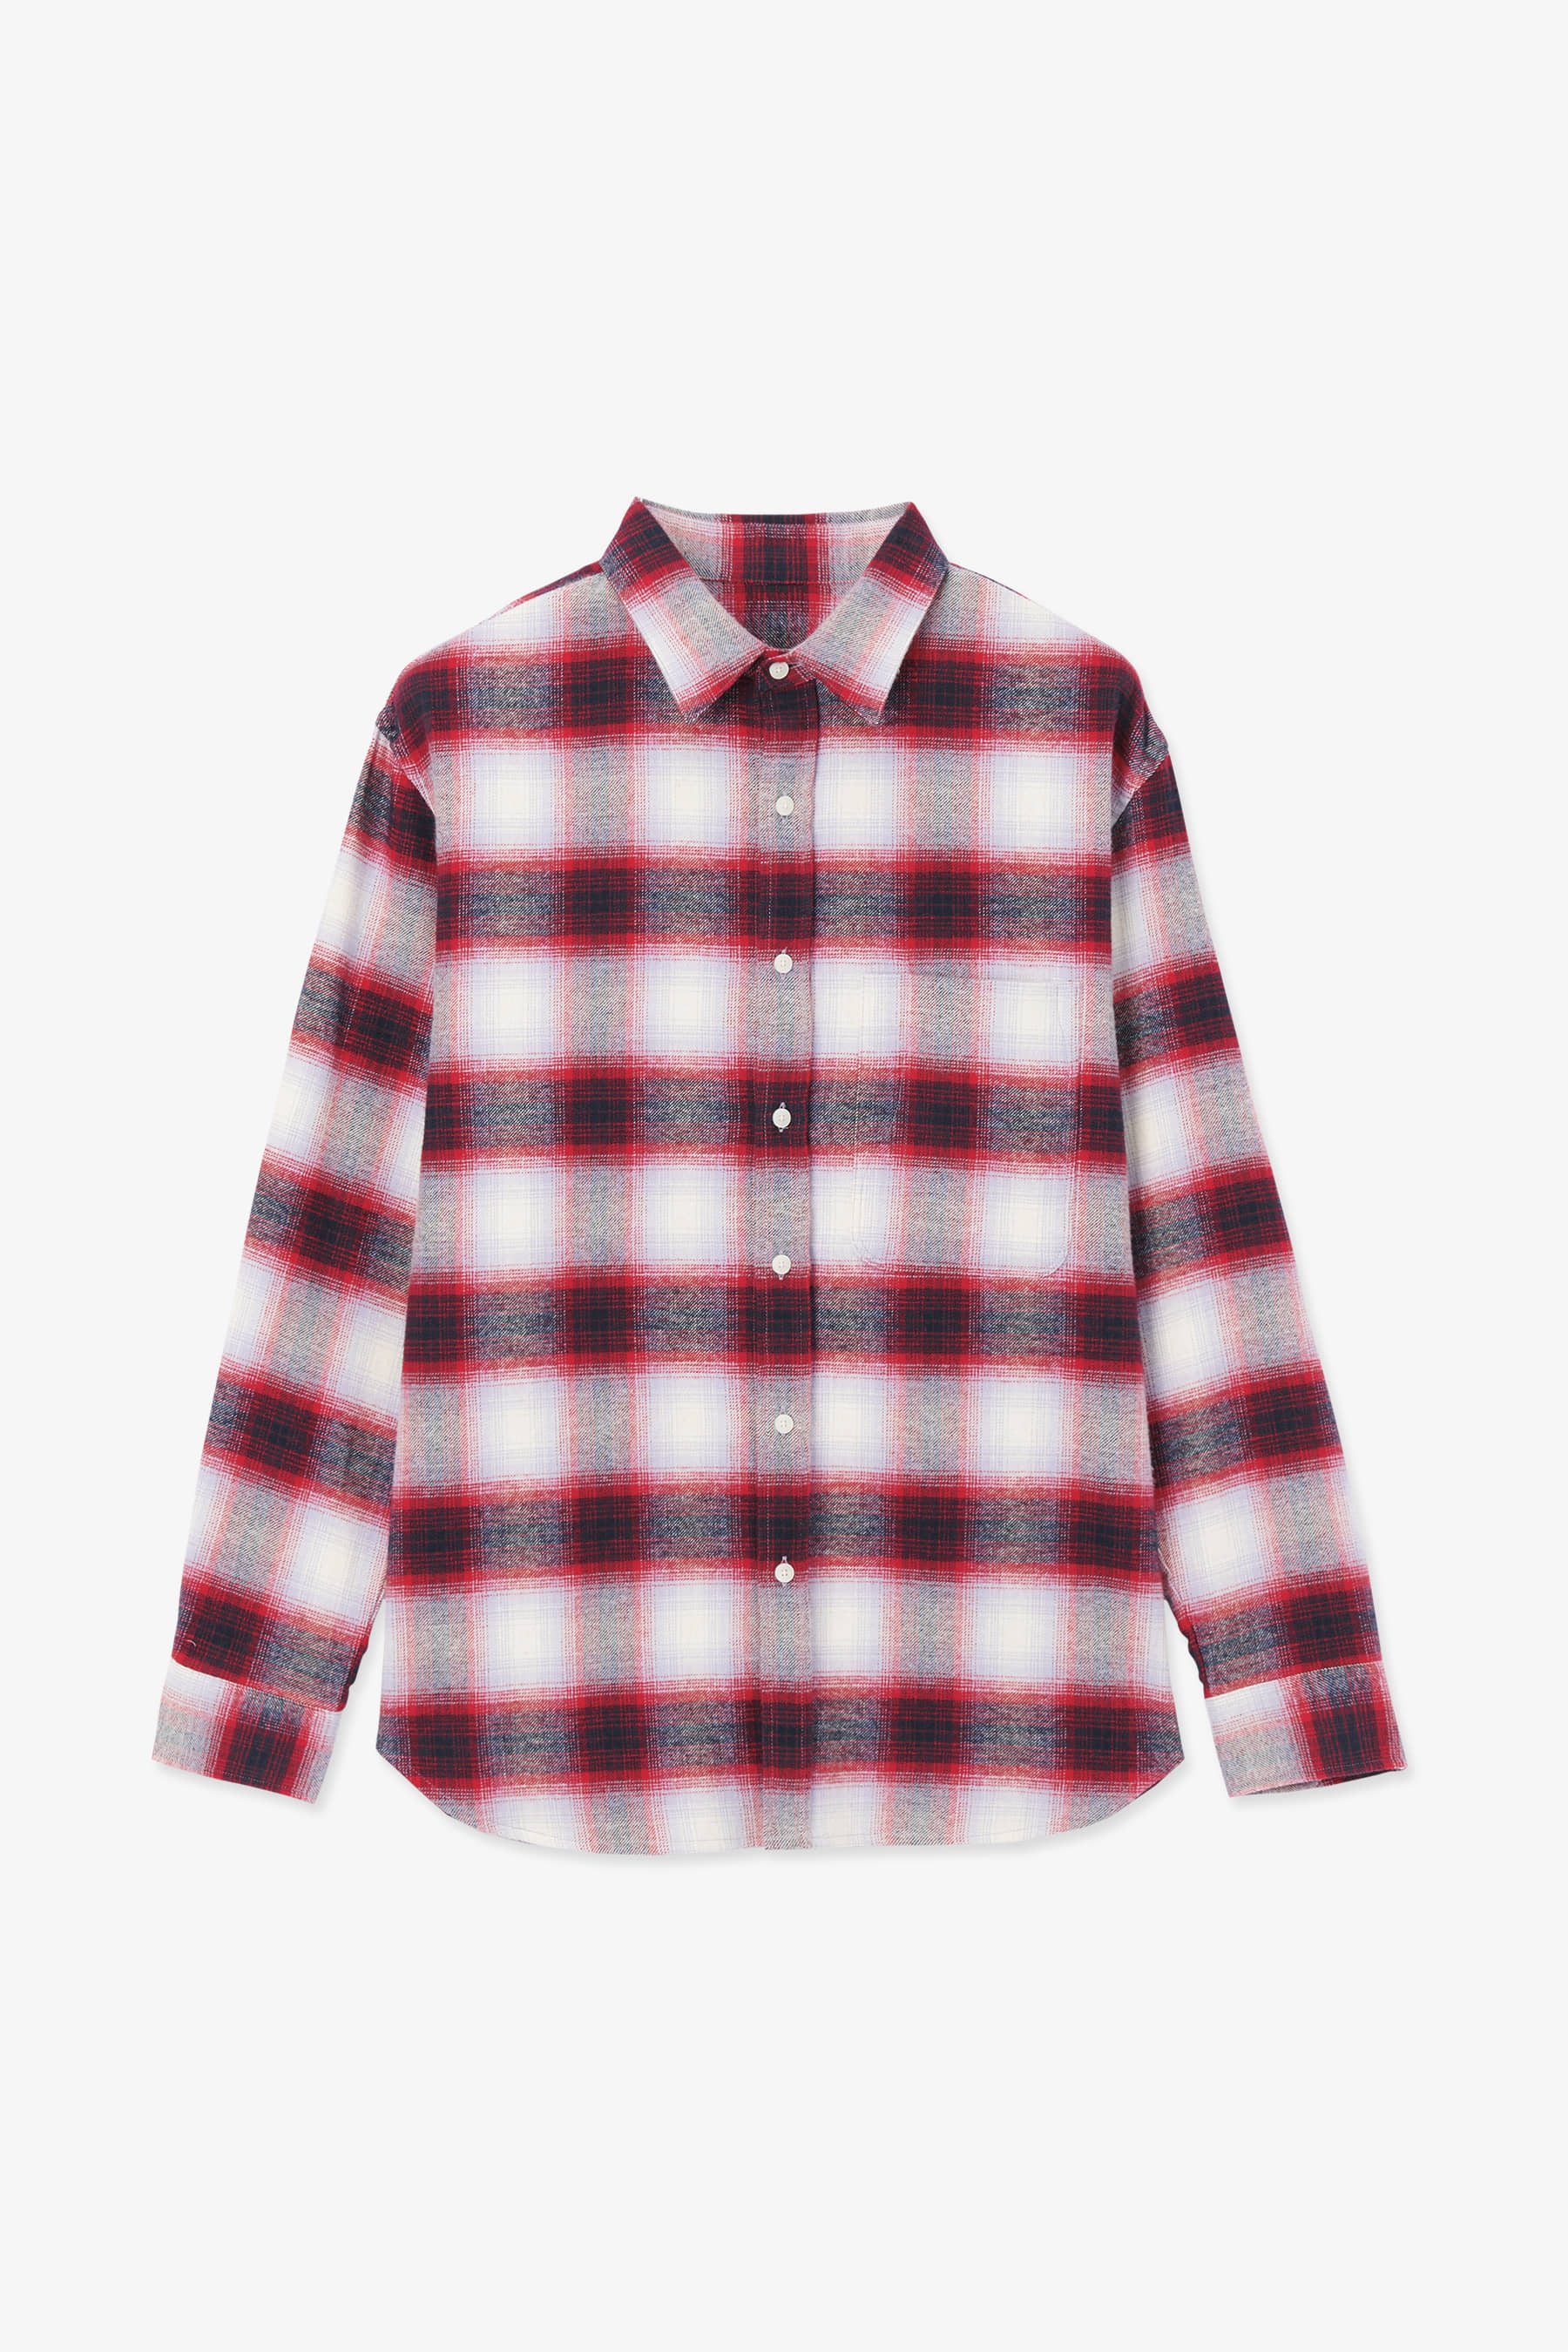 RED CHECK ONE POCKET SHIRTS 02